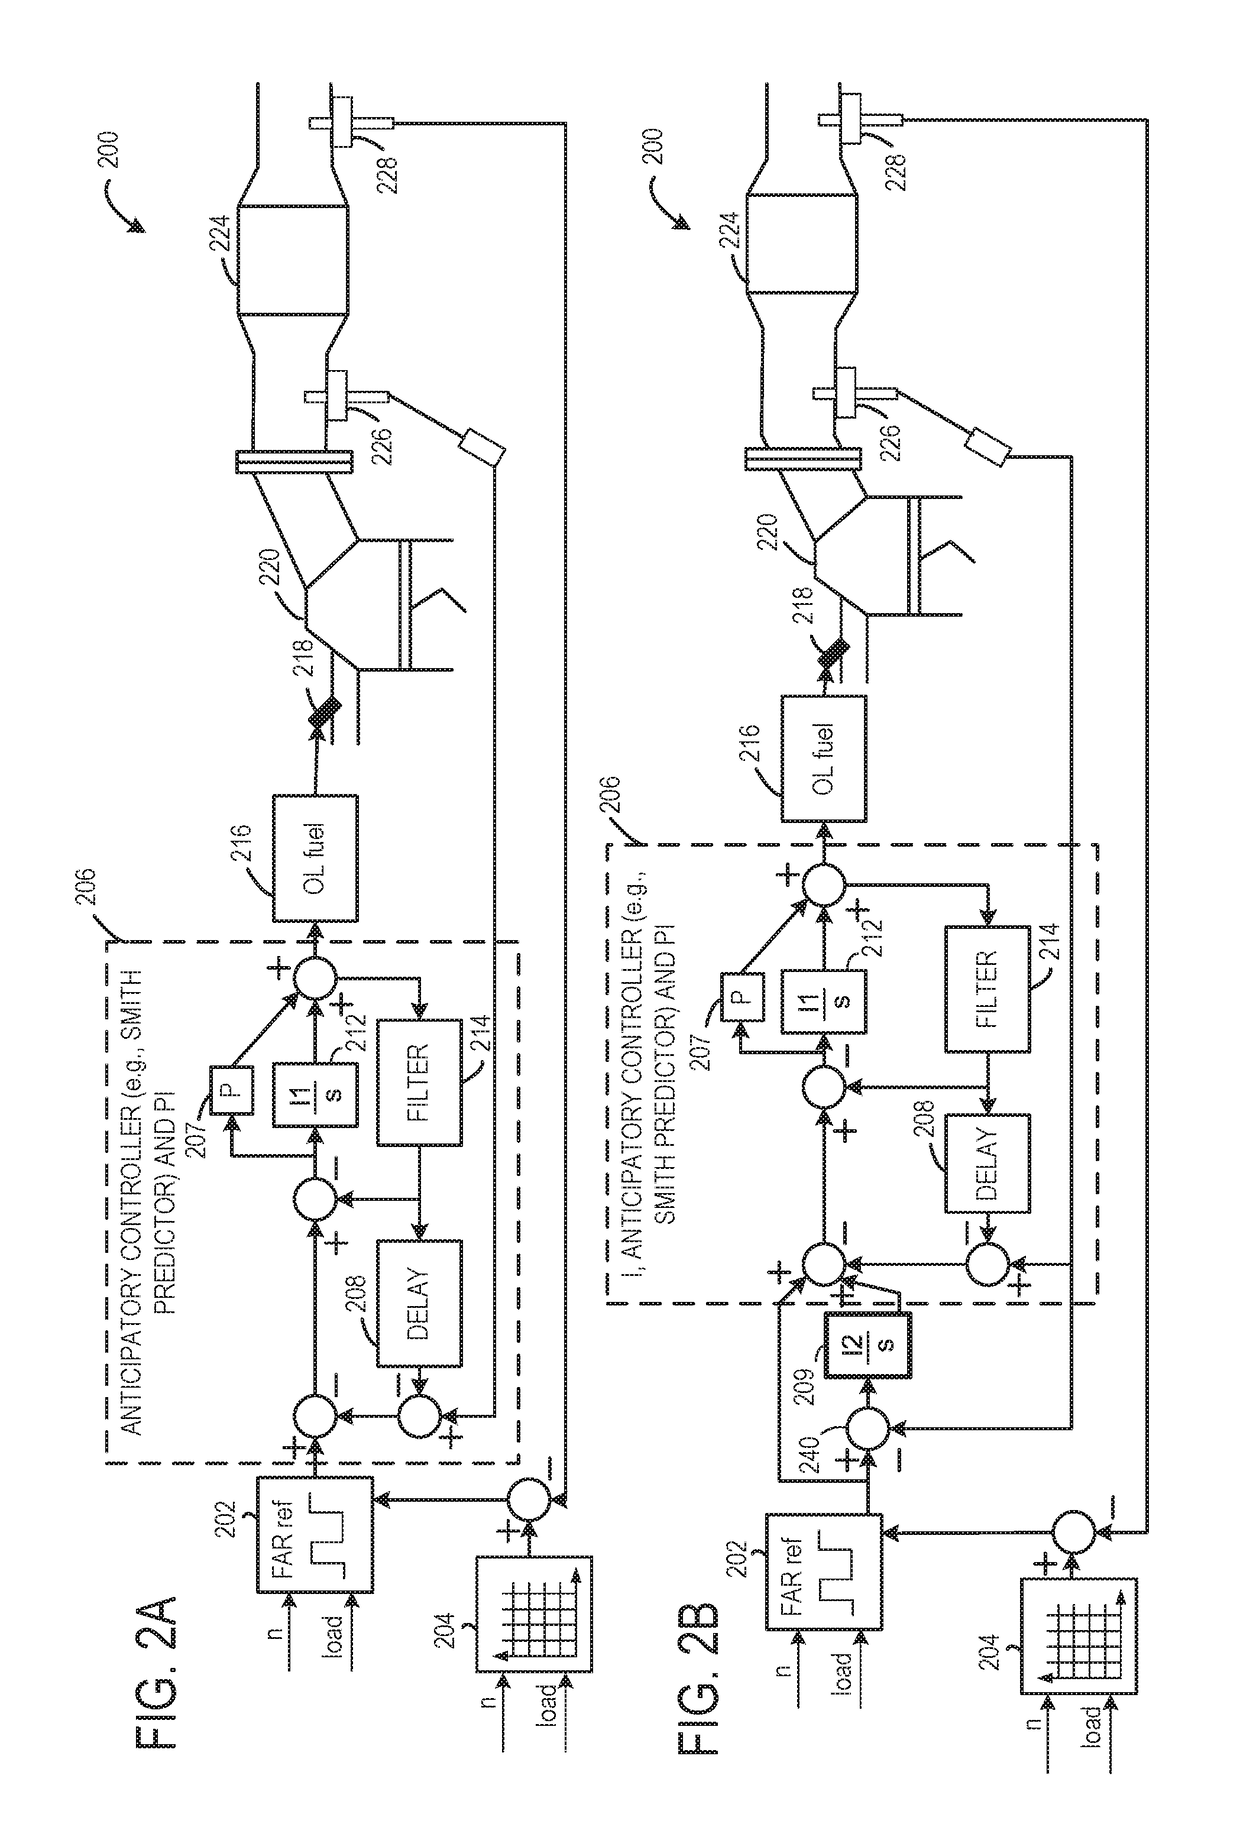 System and method to restore catalyst storage level after engine feed-gas fuel disturbance